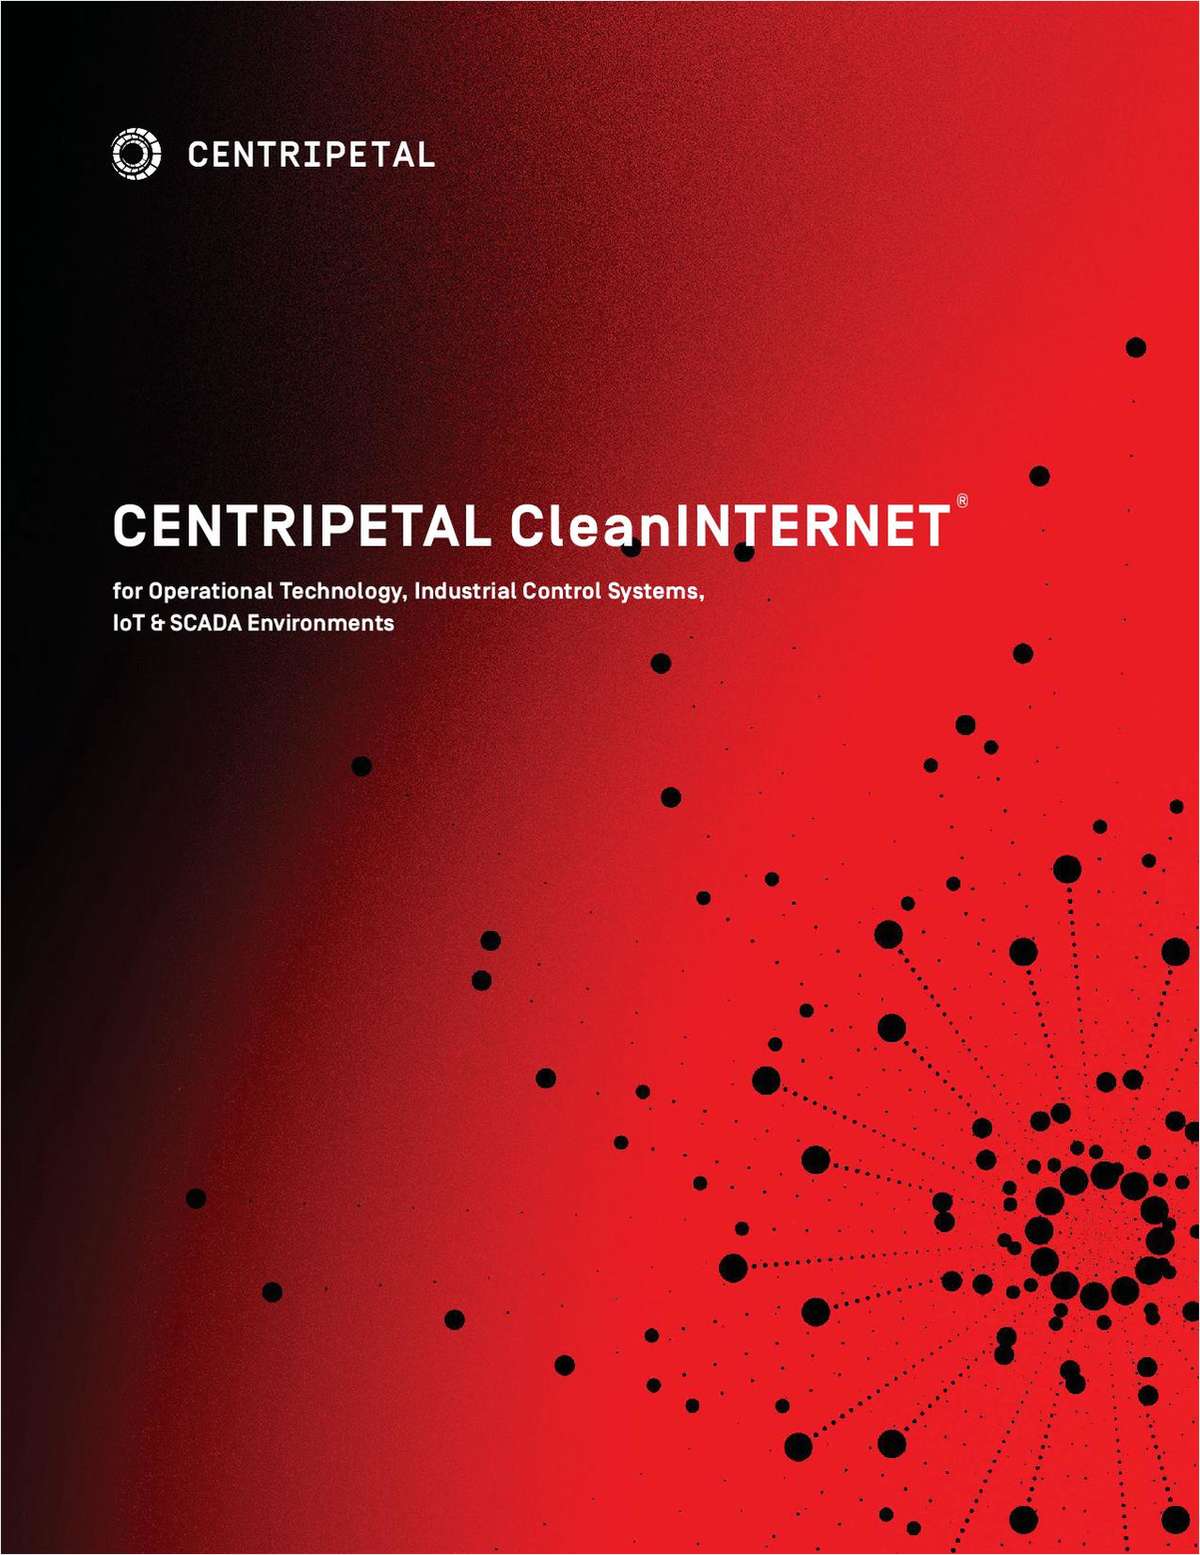 CleanINTERNET IoT Overview